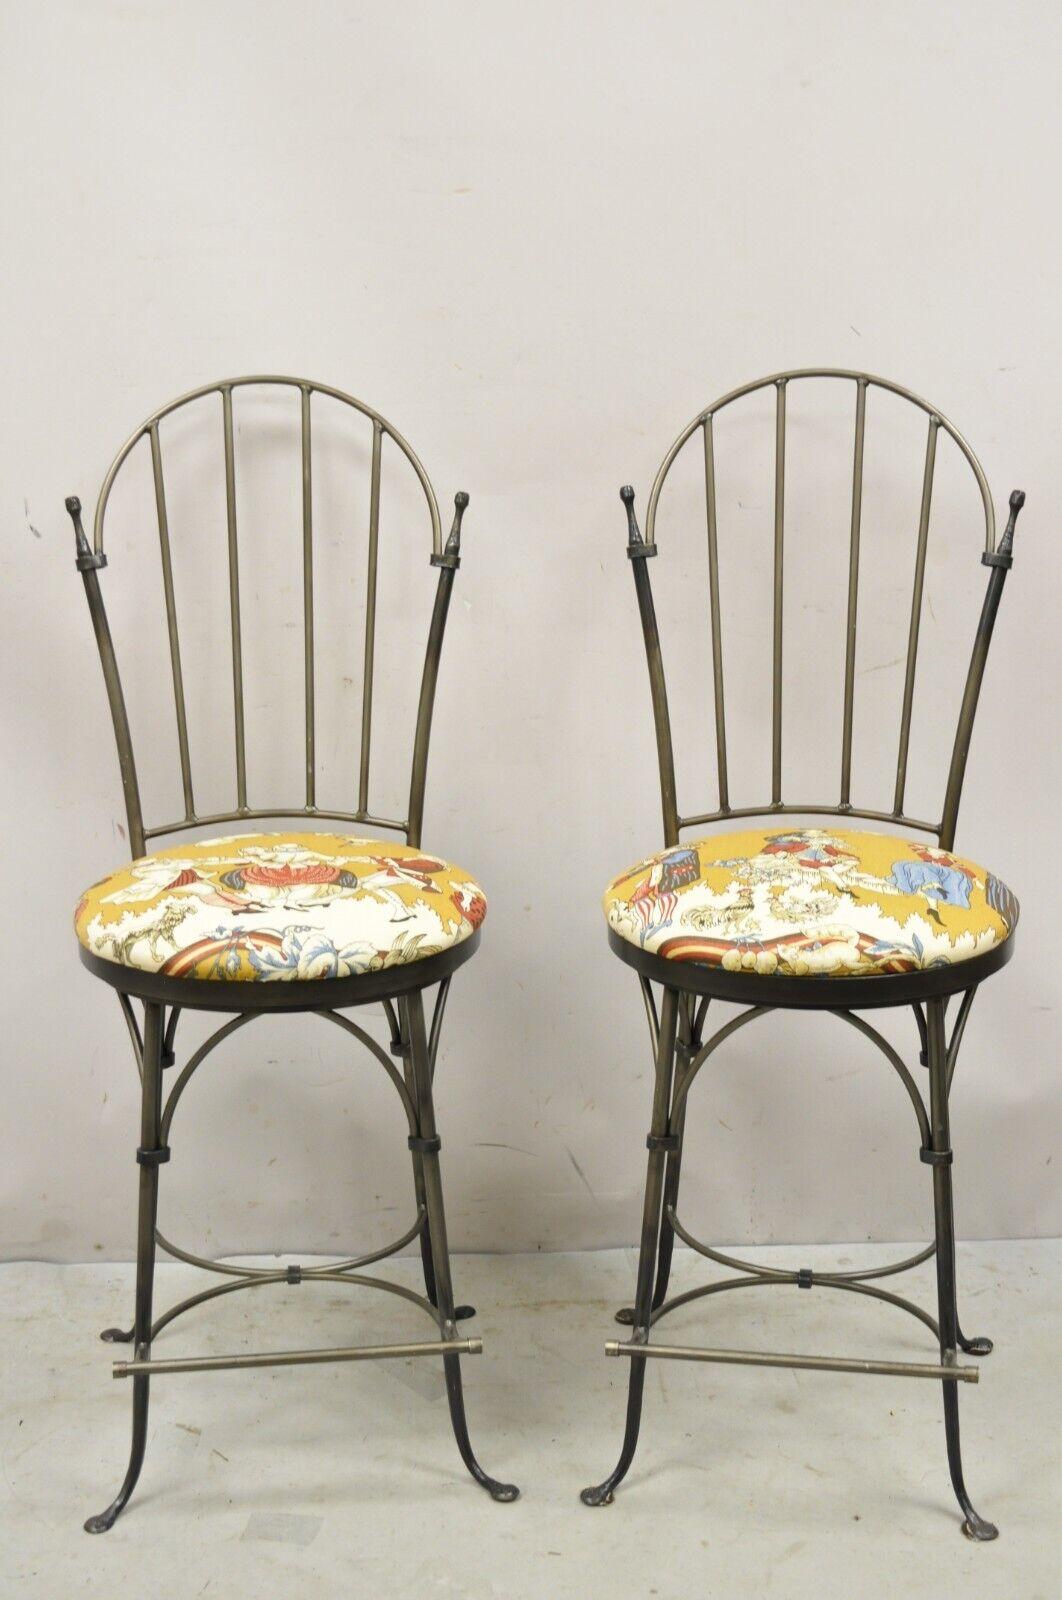 Vintage Charleston Forge Swivel Wrought Iron Counter Bar Stools - a Pair. Item features a heavy wrought iron construction, swivel seats, iron footrest, original label, quality American craftsmanship, great style and form. circa late 20th century.